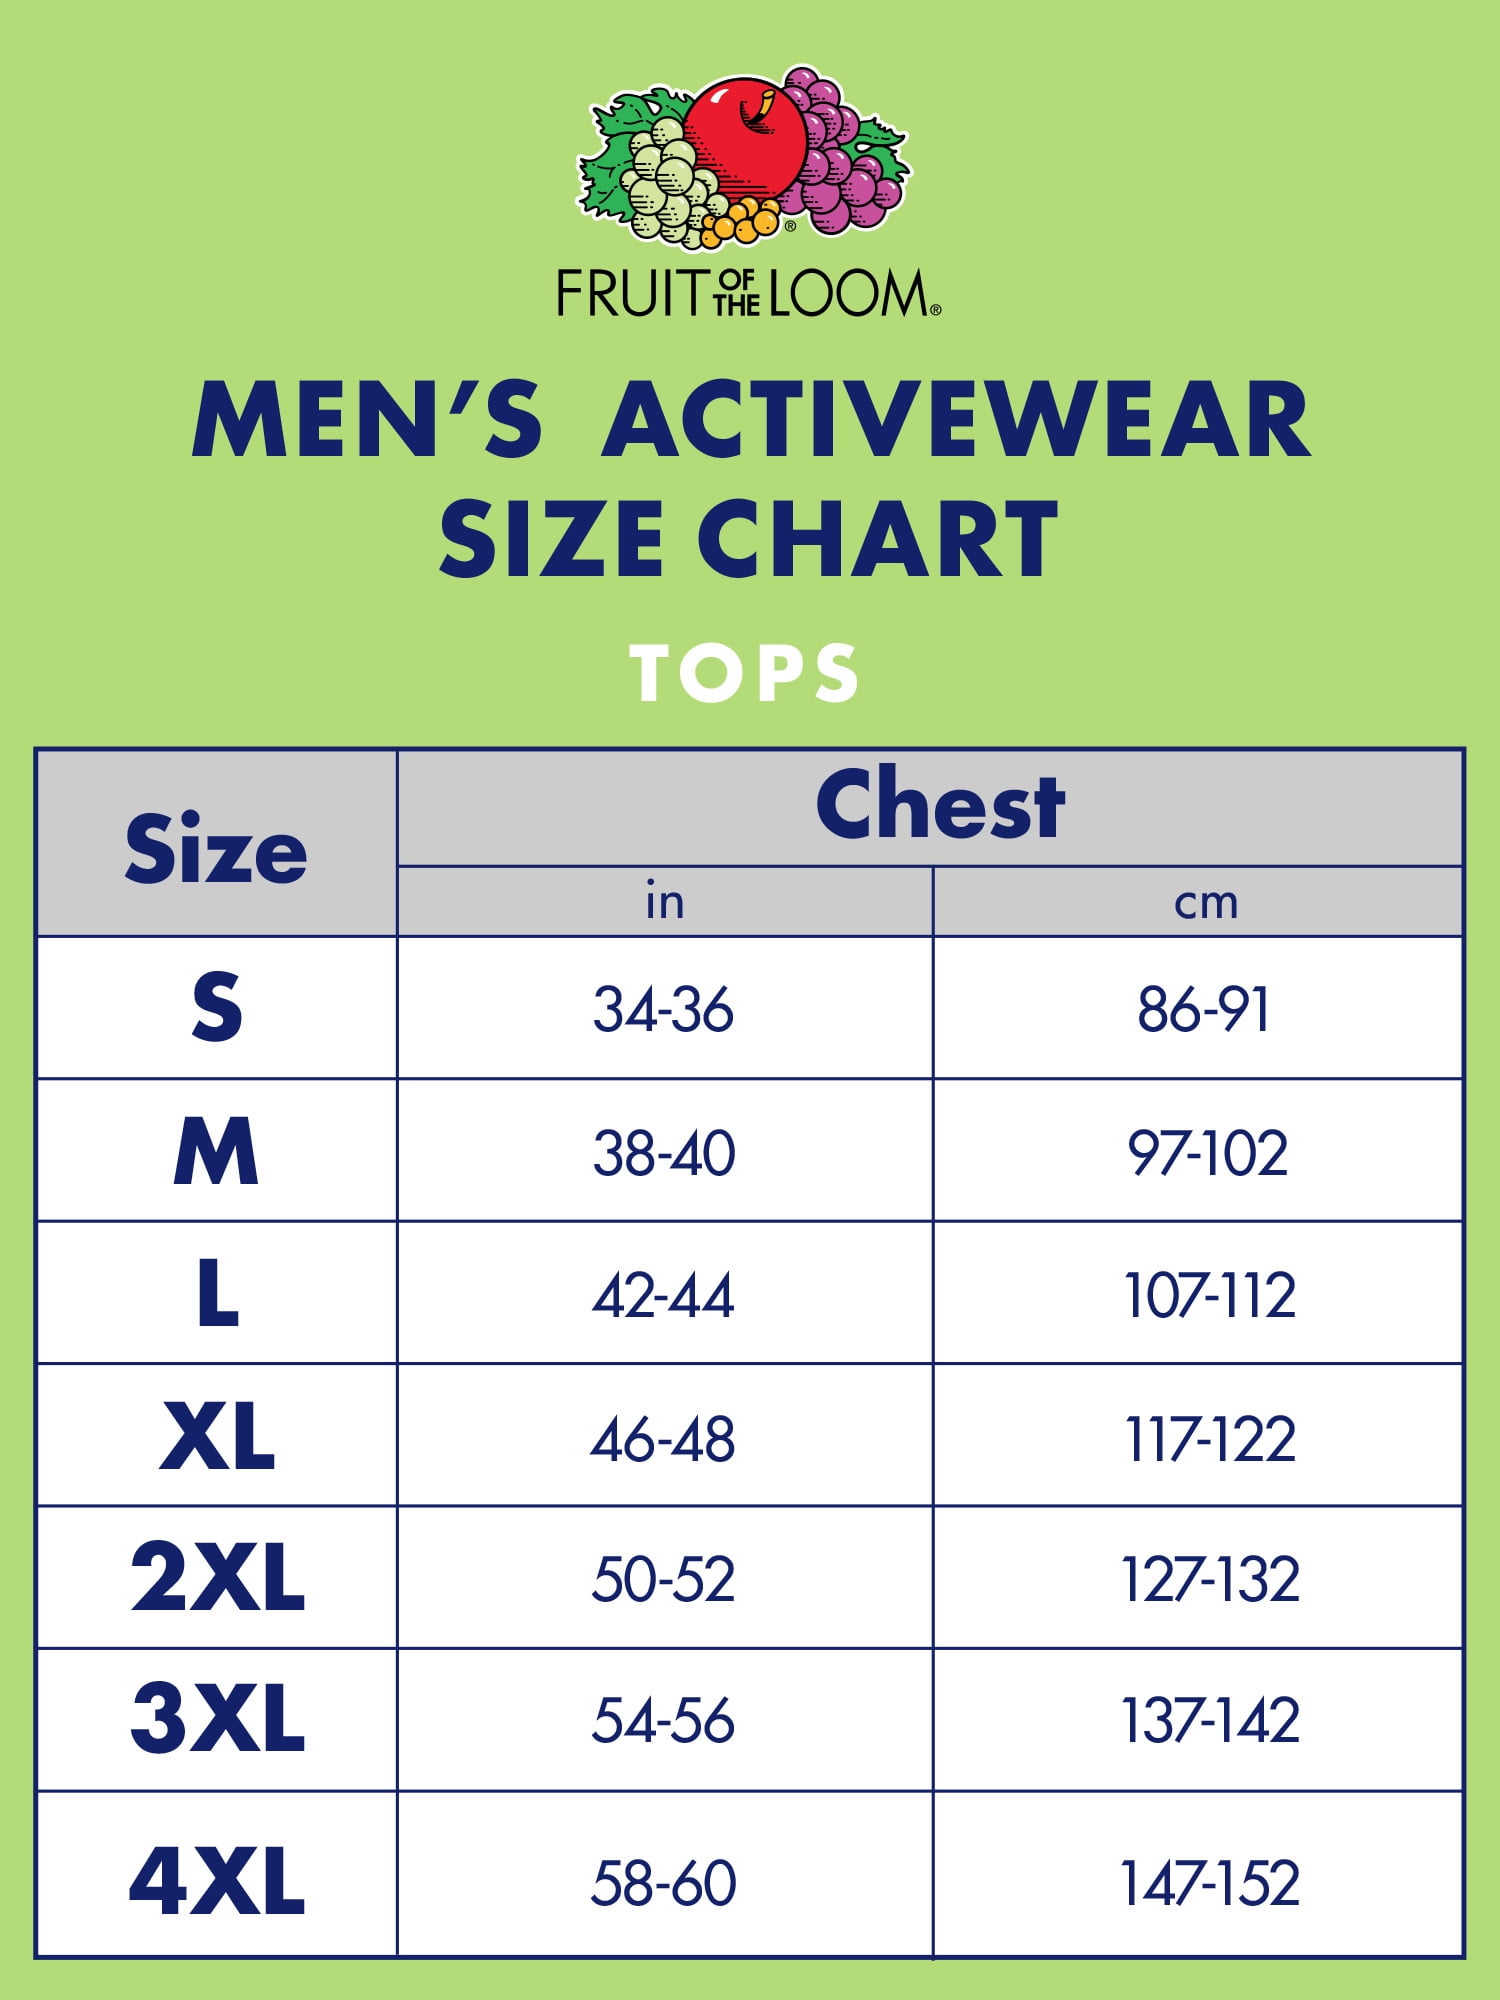 Fruit Of The Loom Boys Size Chart